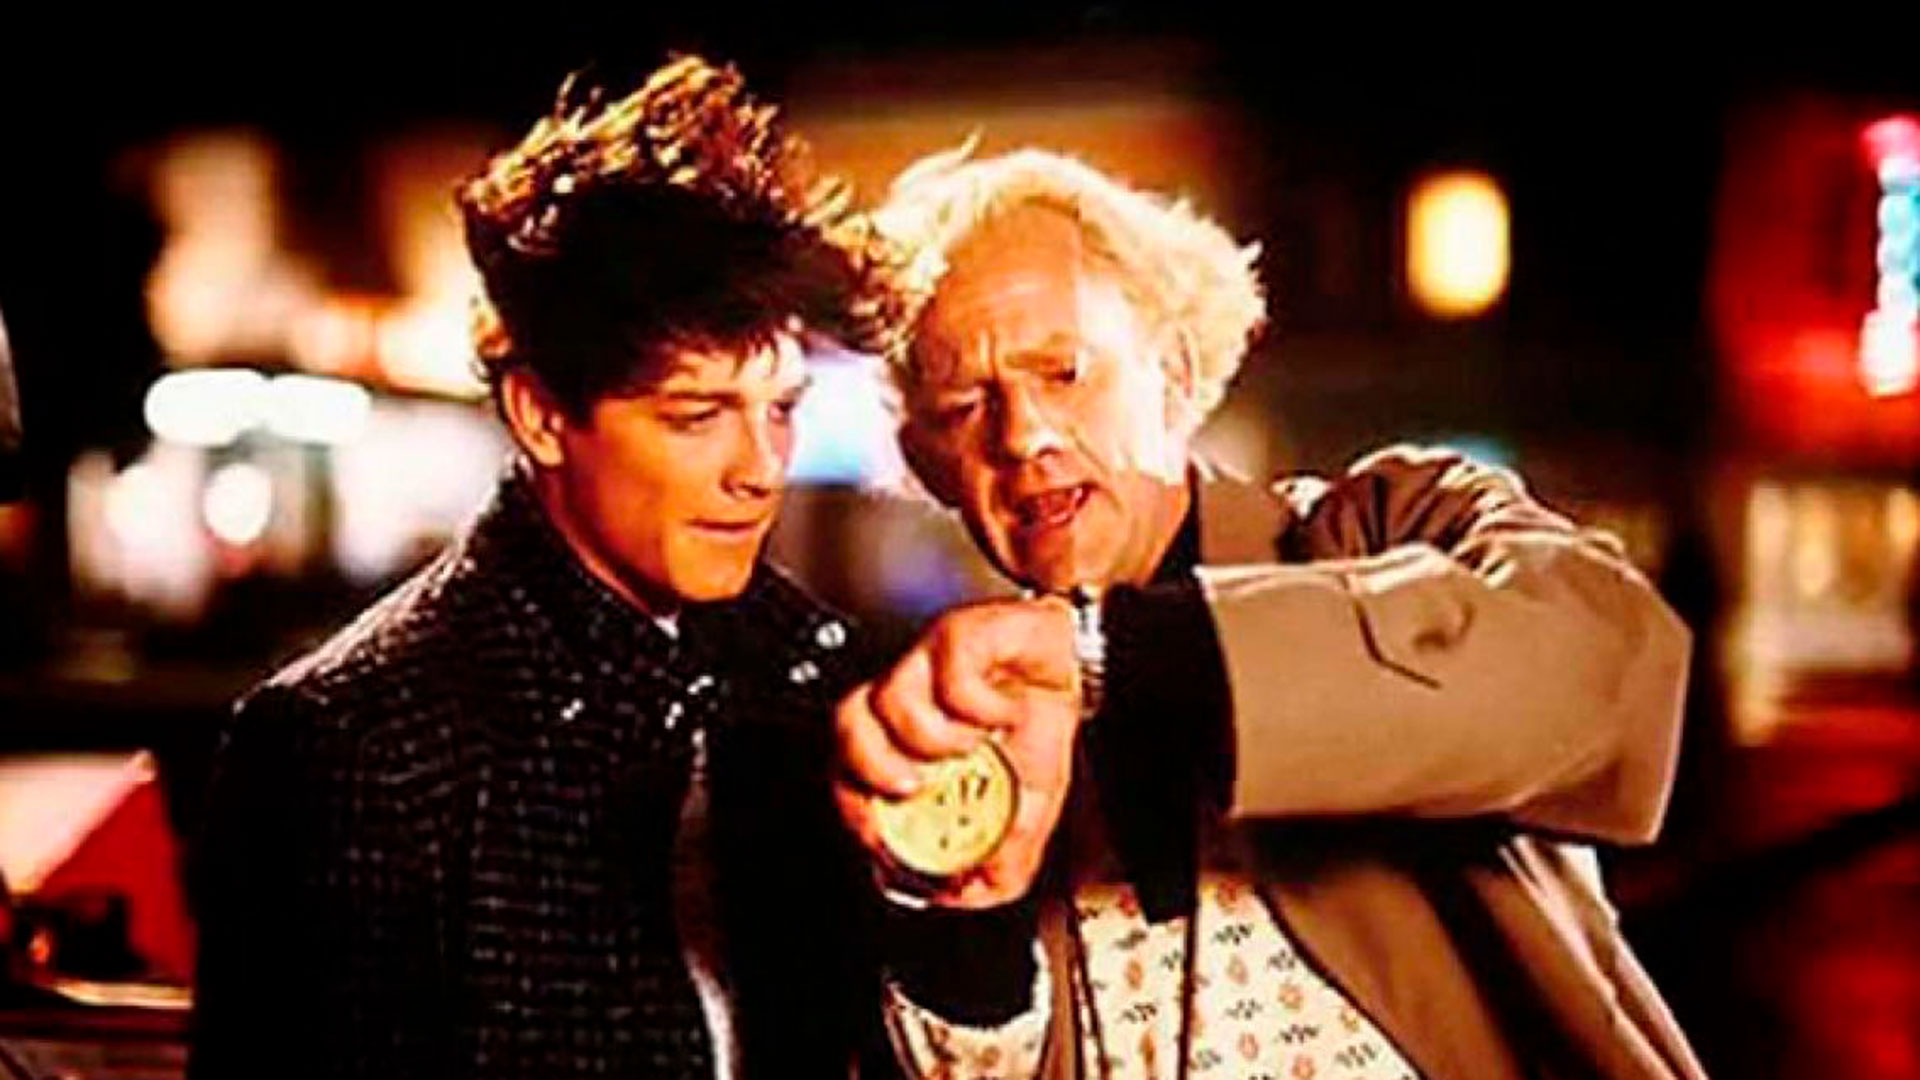 Eric Stoltz In One Of The Scenes Shot For Back To The Future With Christopher Lloyd (Netflix Capture)